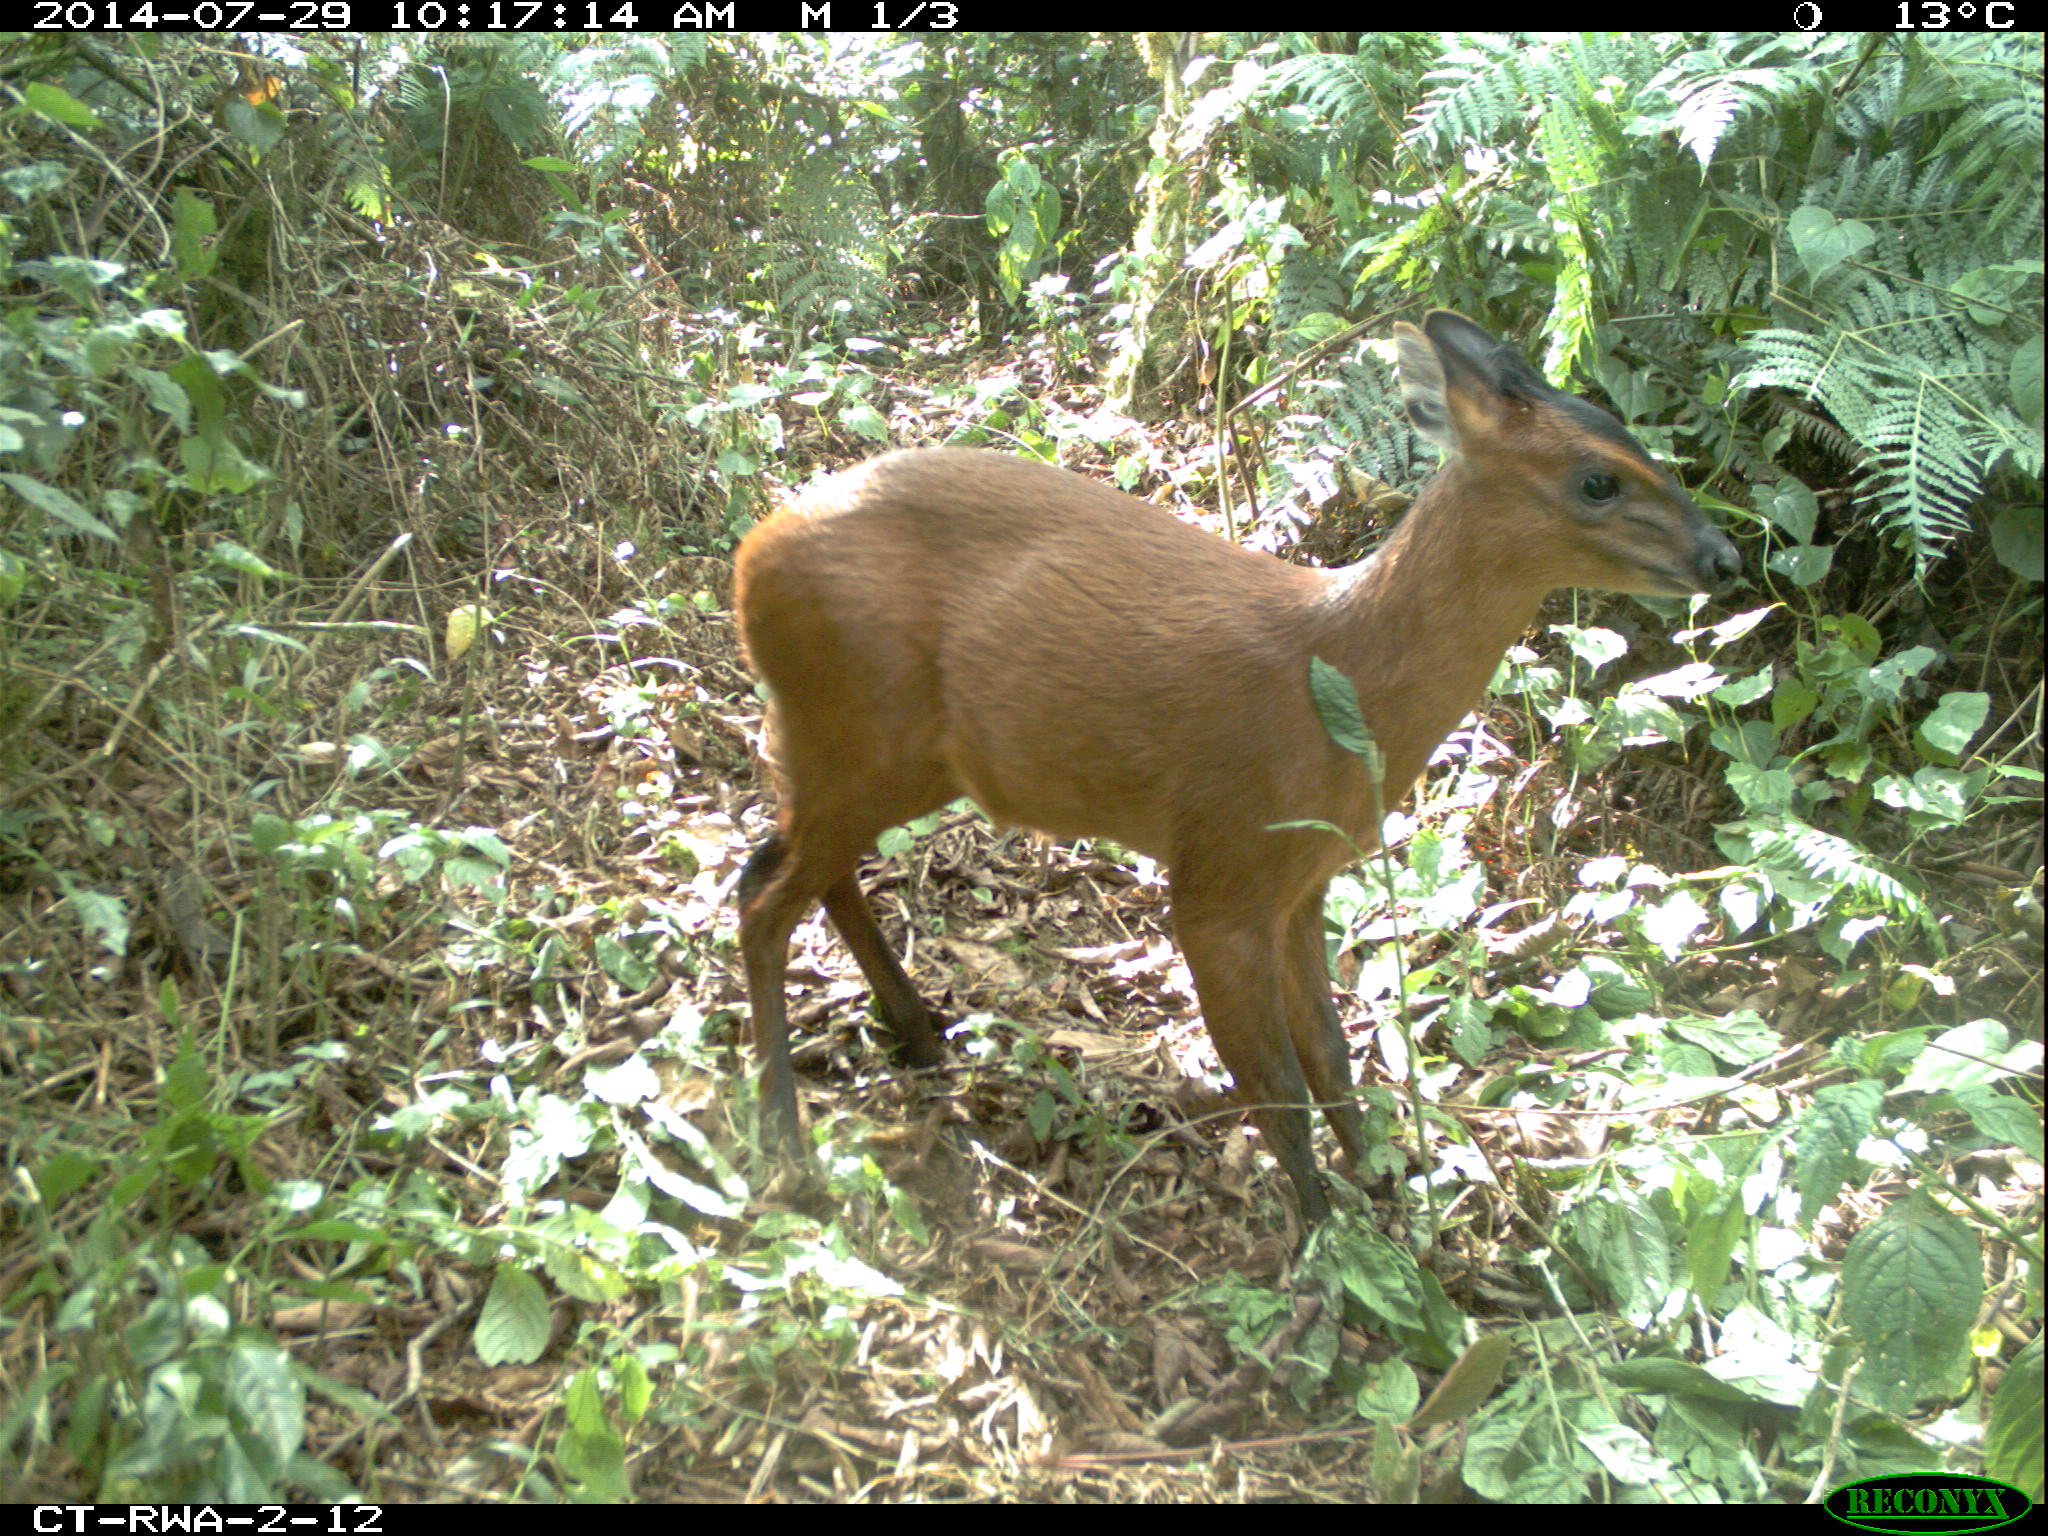 A small brown antelope with a black marking around its nose and forehead is photographed among green foliage. Information around the border of the photo show it was taken at 10:17 a.m. on July 29, 2014, when it was 13 degrees Celsius. The camera, made by Reconyx, is labeled CT-RWA-2-12.